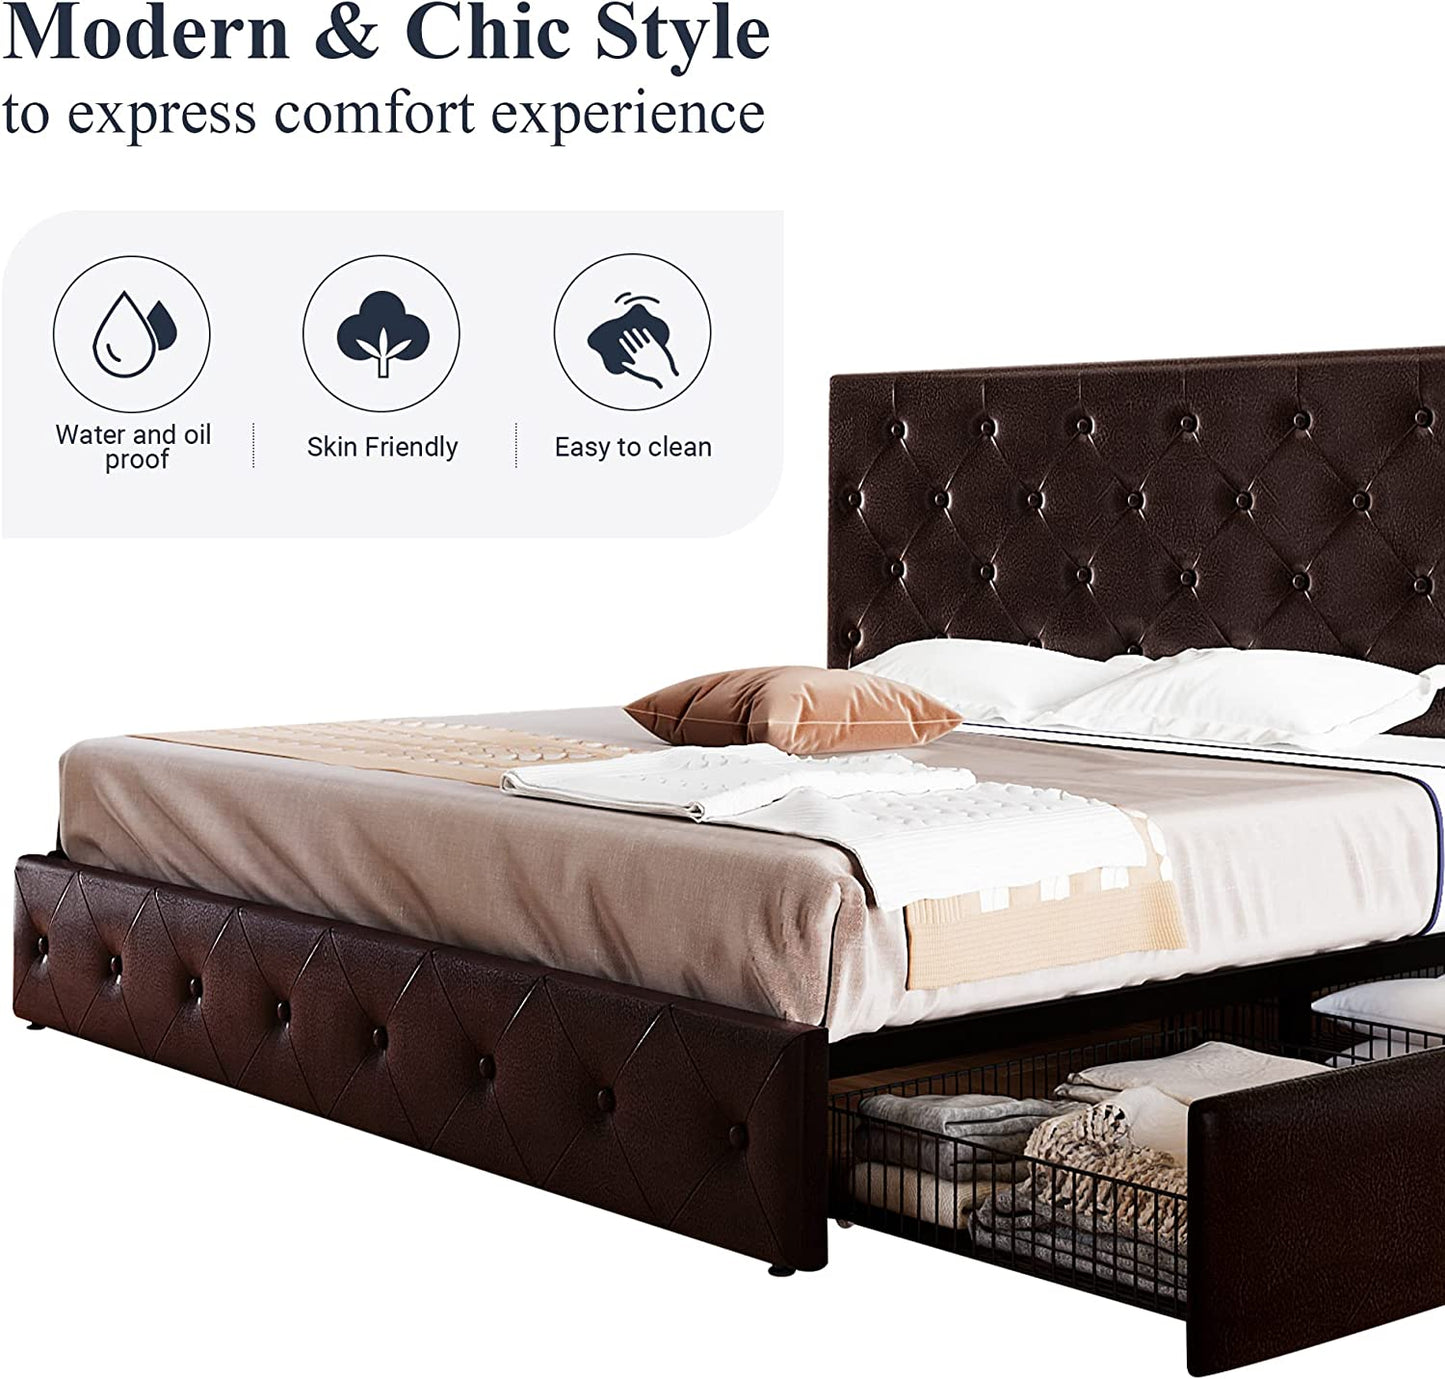 Allewie Platform Bed Frame with 4 Drawers, Diamond Stitched Button Tufted Faux Leather Upholstered